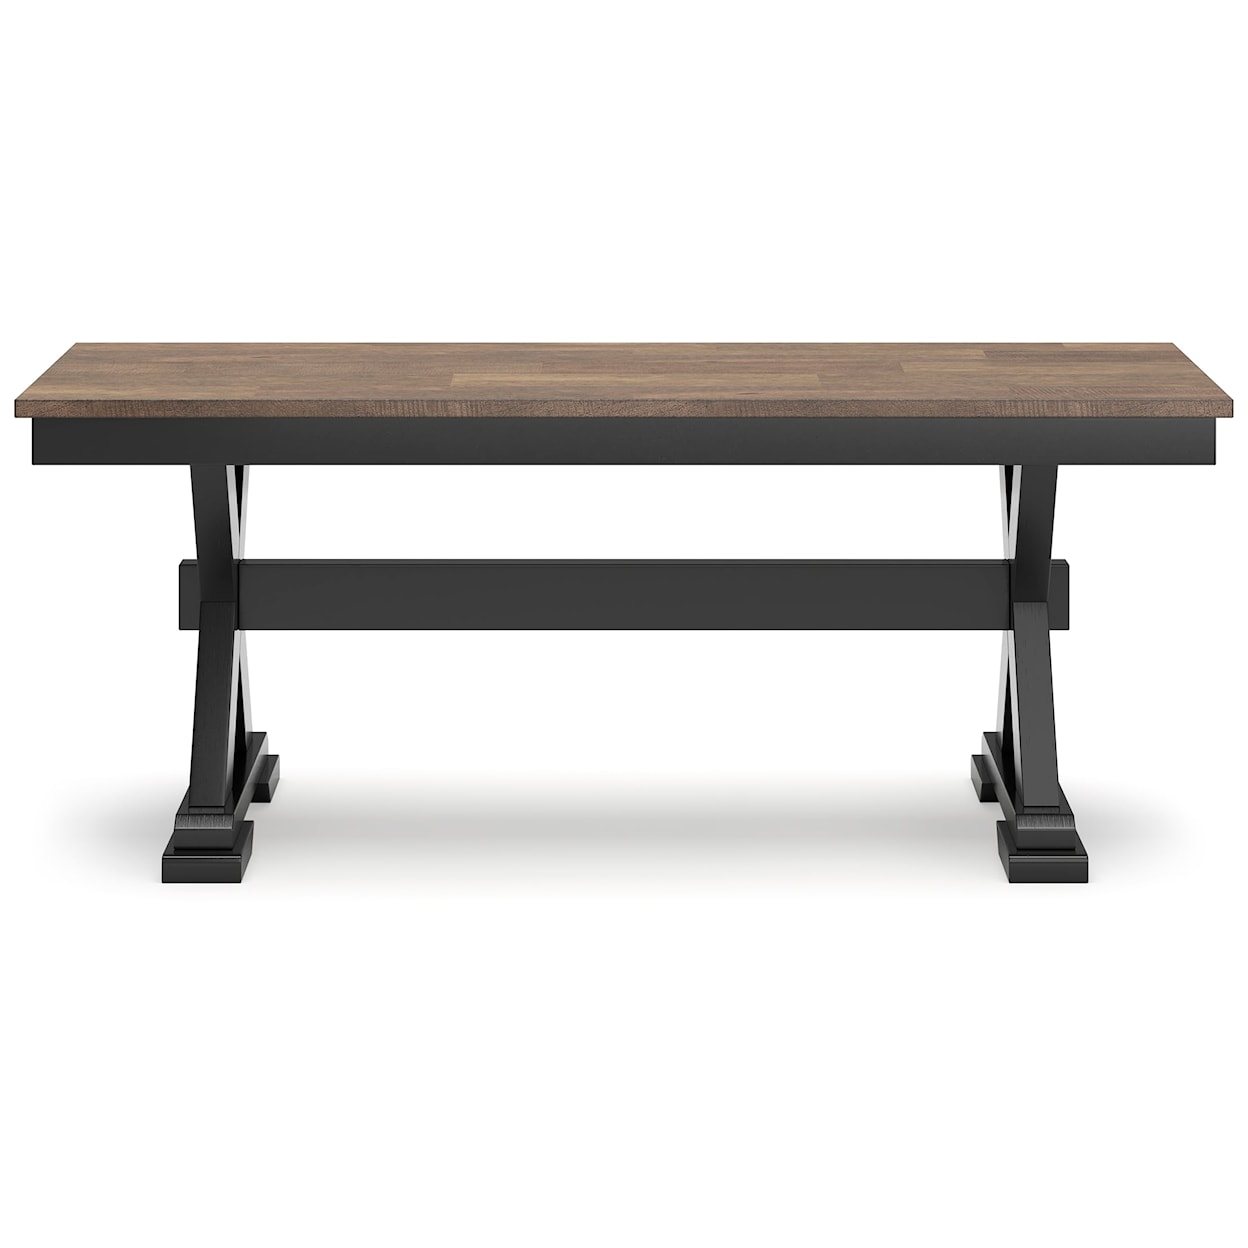 Signature Design by Ashley Wildenauer Large Dining Room Bench